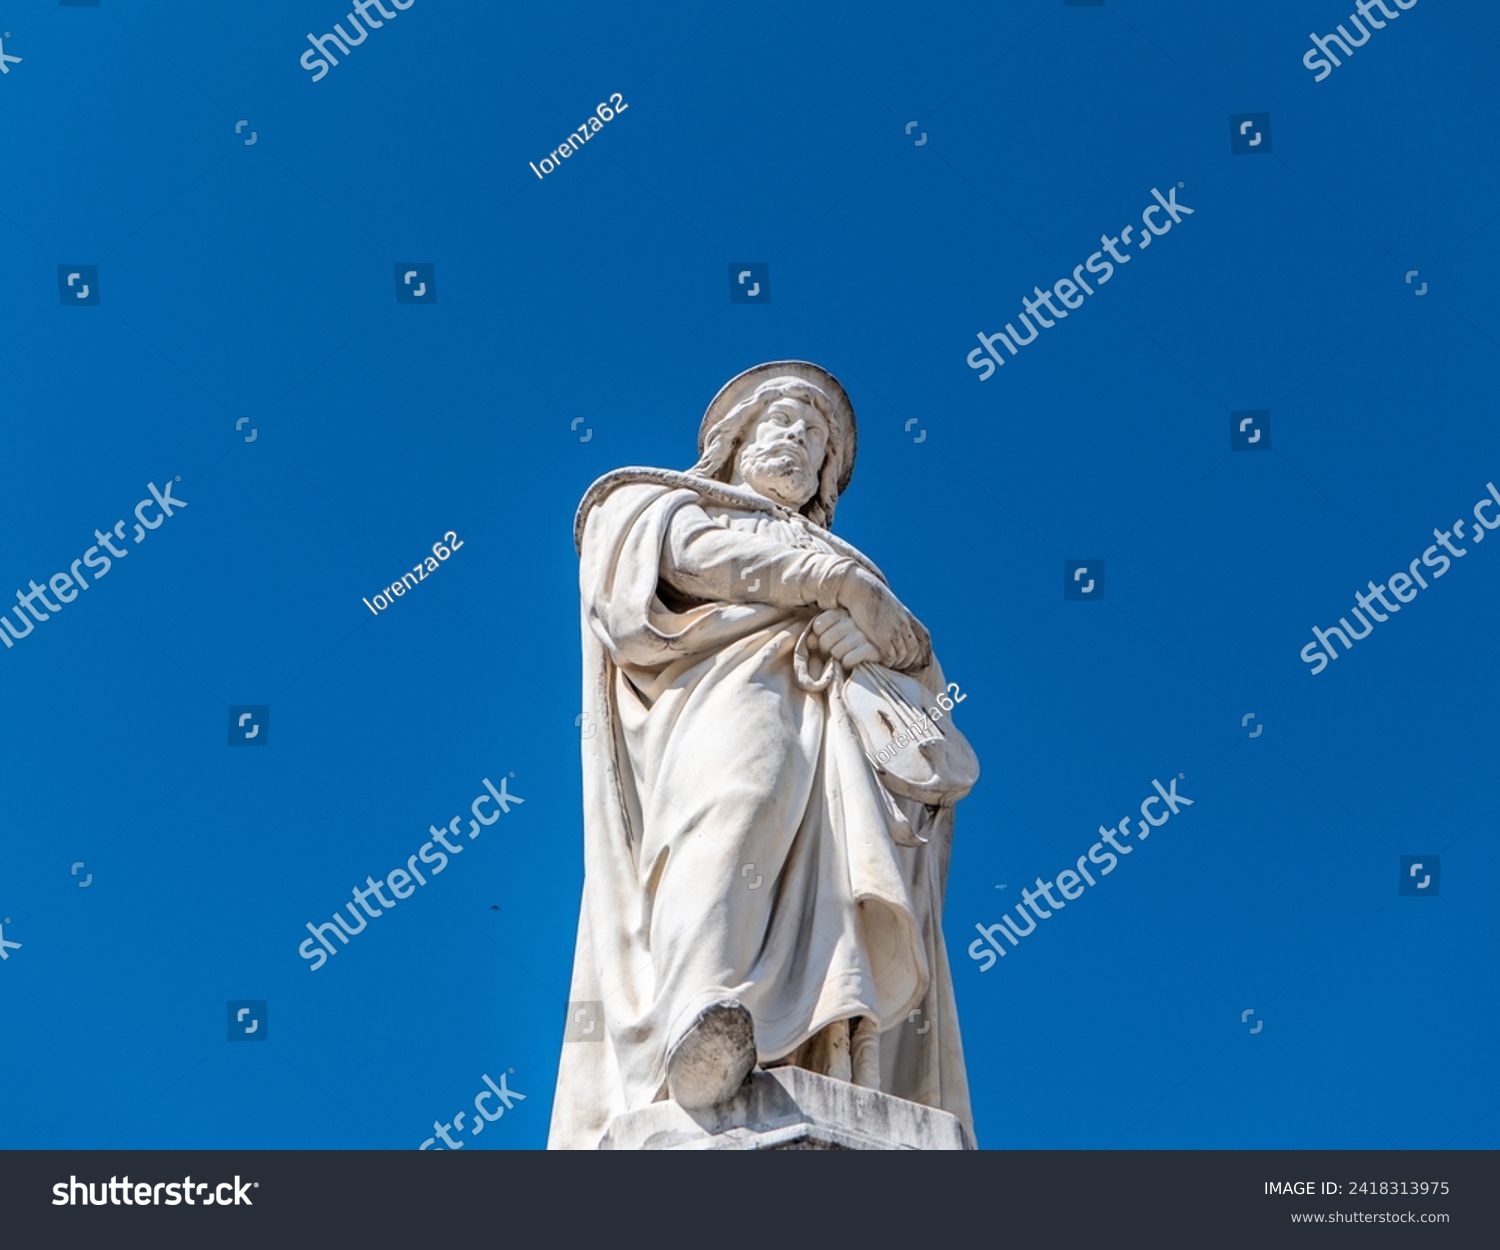 details of the marble Statue of Walther von der Vogelweide, Bolzano town, Bolzano province, Trentino-Alto Adige region, northern Italy. #2418313975